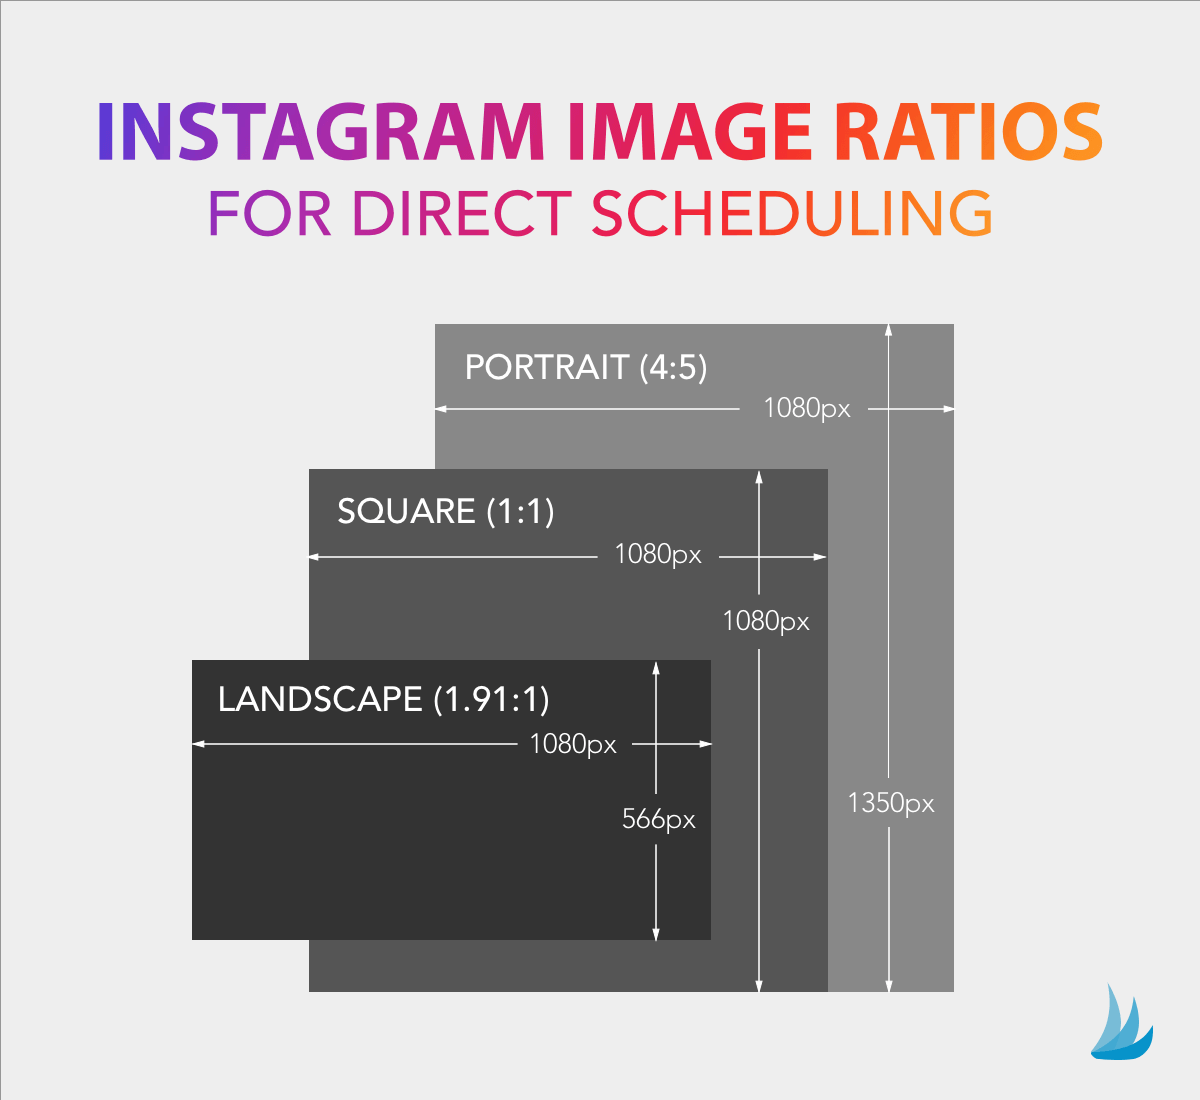 Instagram Image Ratios for Direct Scheduling